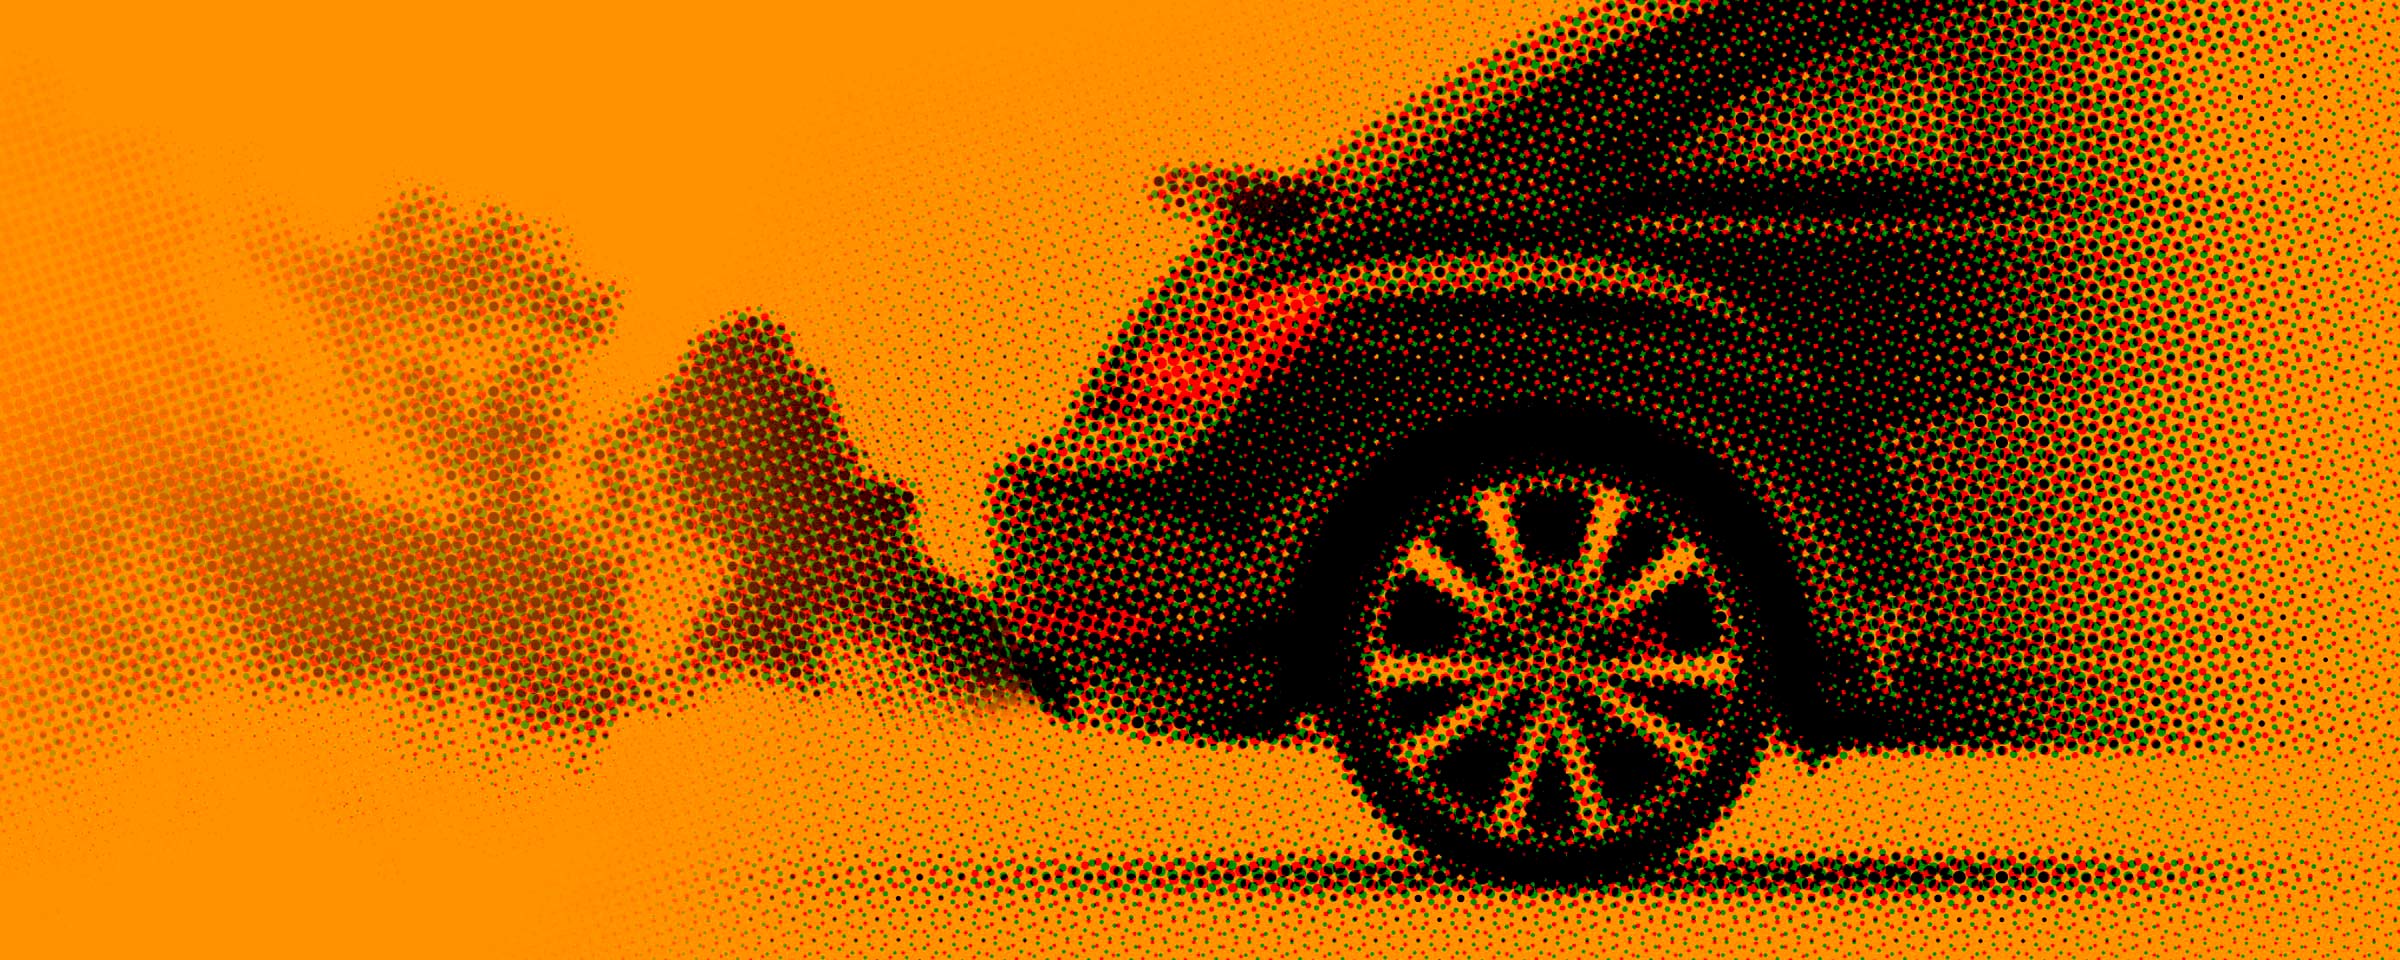 Car on the road created with tiny dots